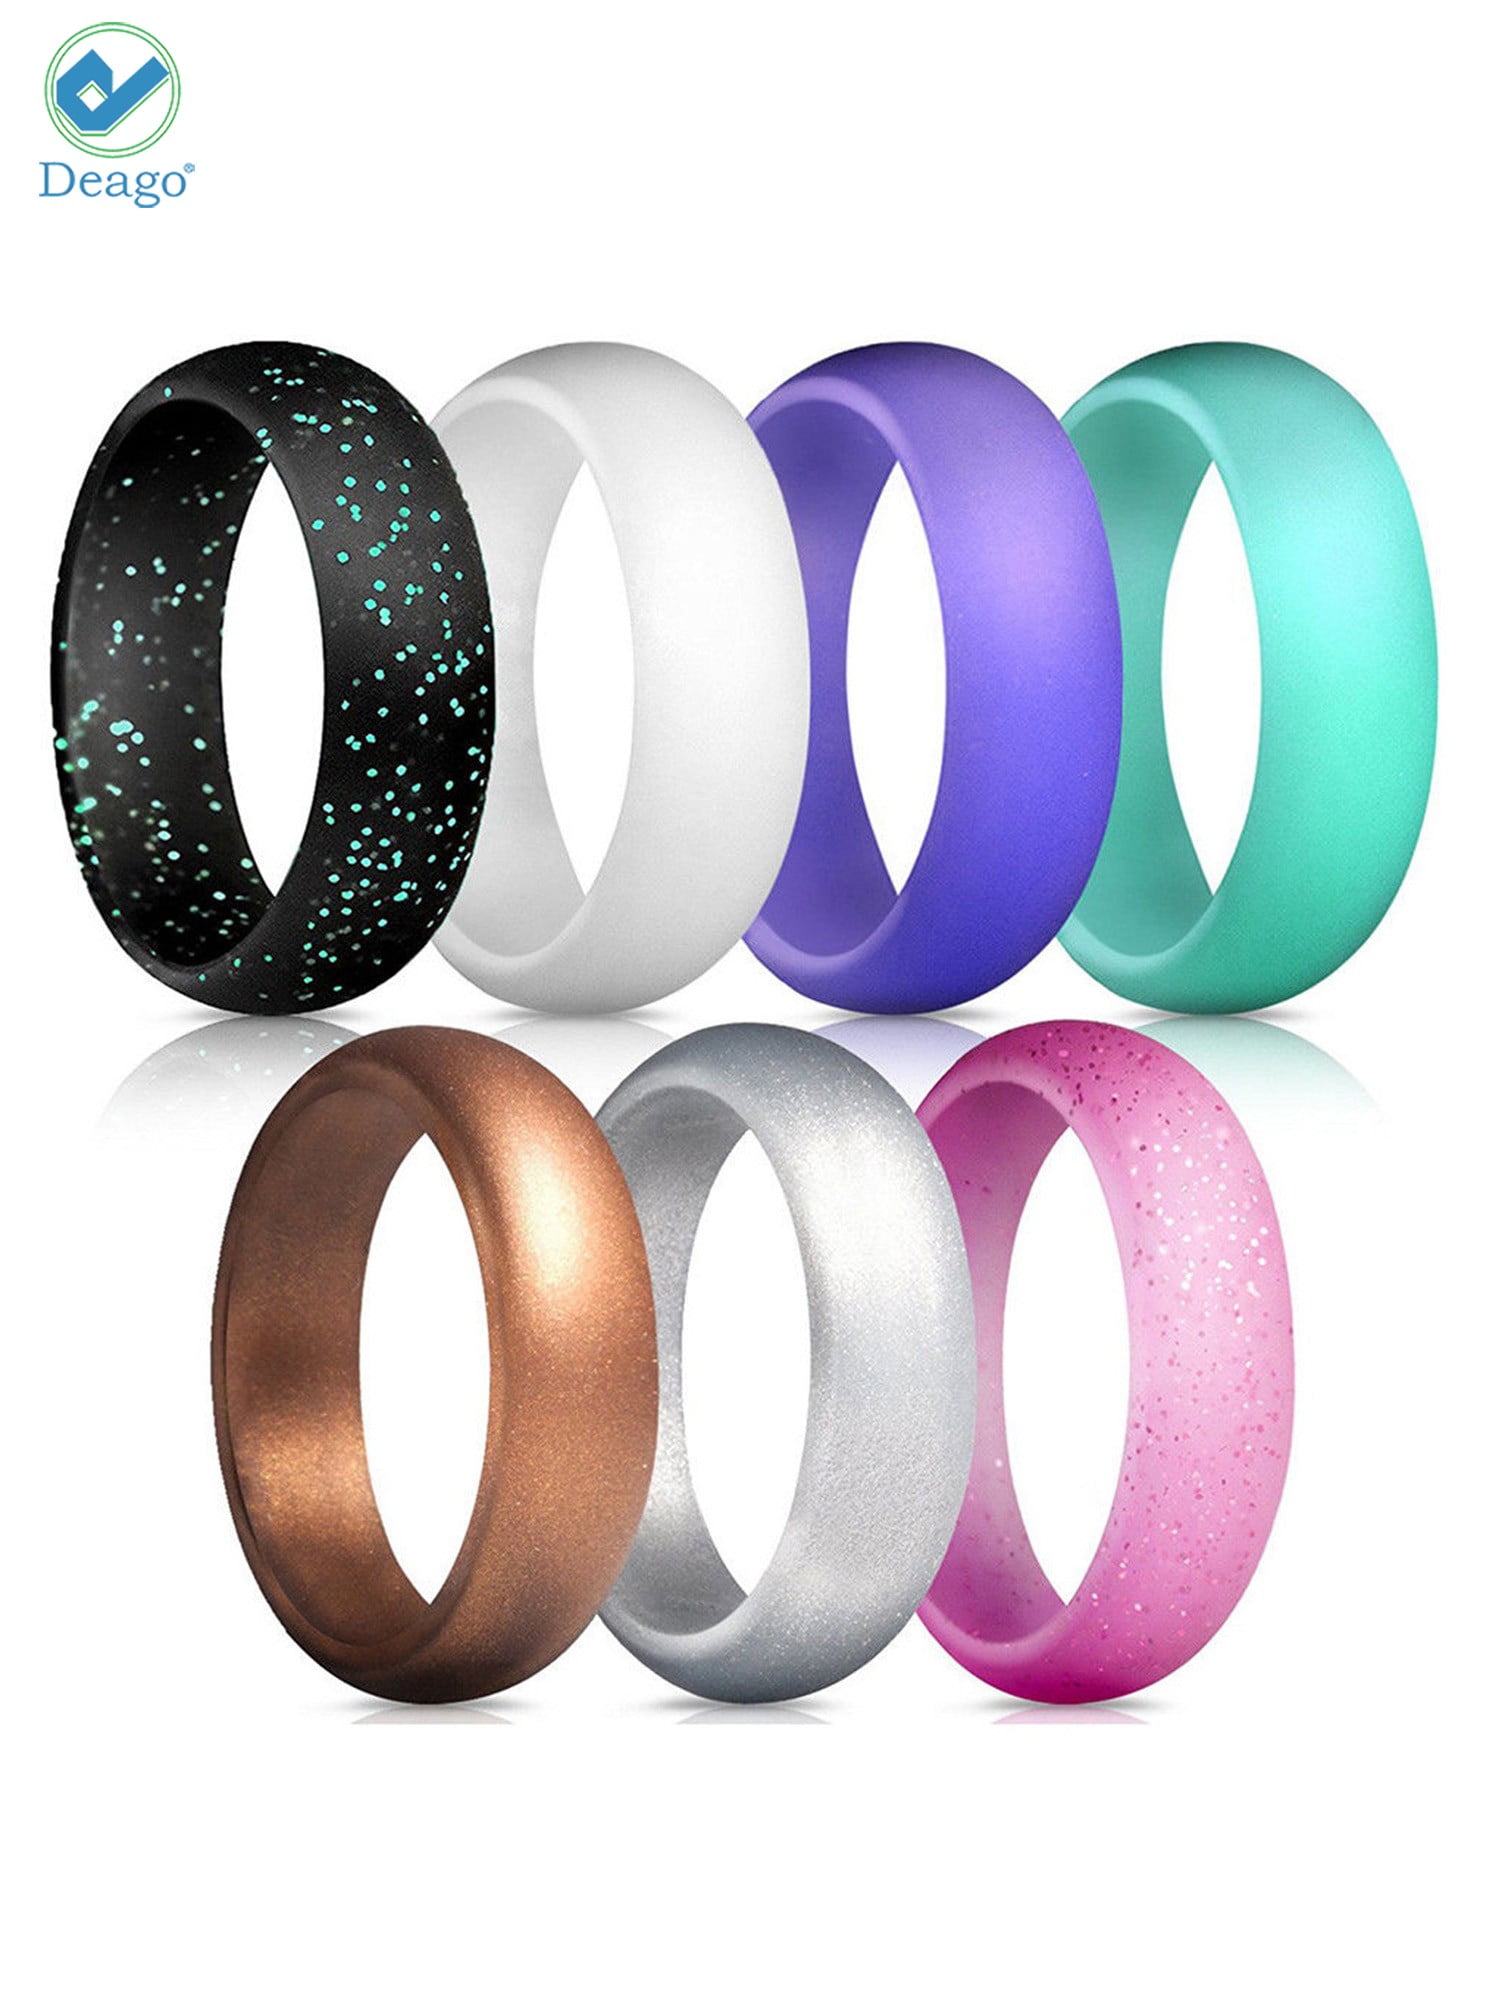 DARLING HER Thin Braided Silicone Ring Women Wedding Rings Rubber Bands Sport Hypoallergenic Crossfit Flexible Woven Silicone Finger Rings